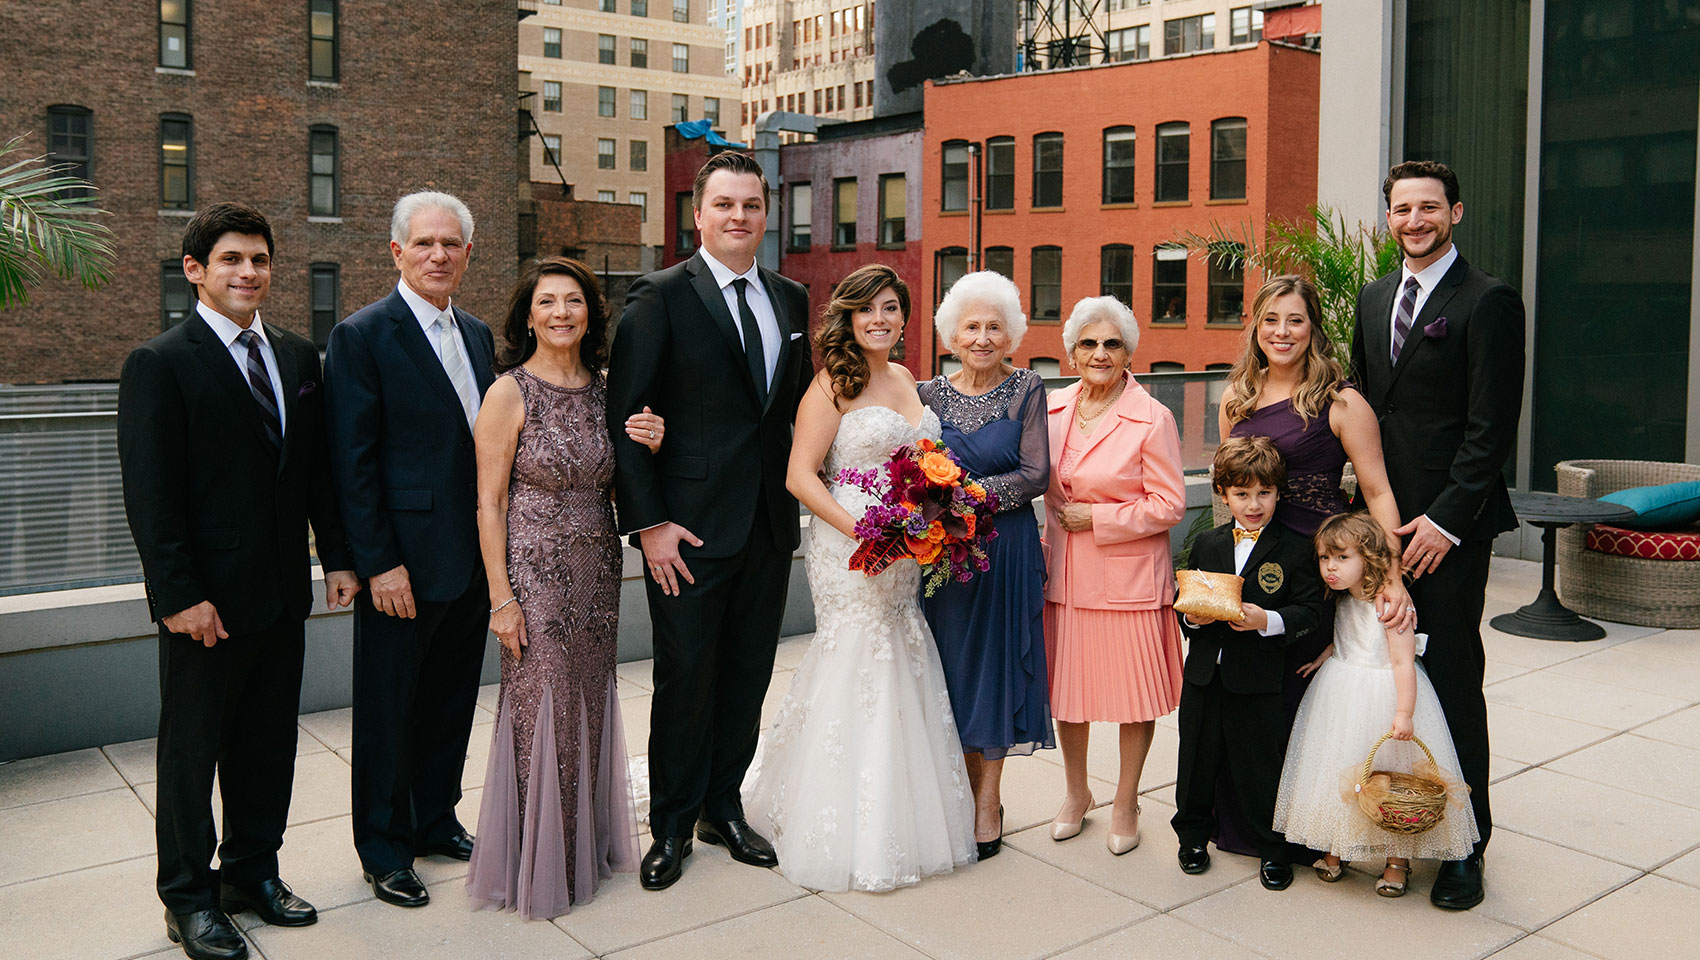 April and Daniel with family members on their wedding day